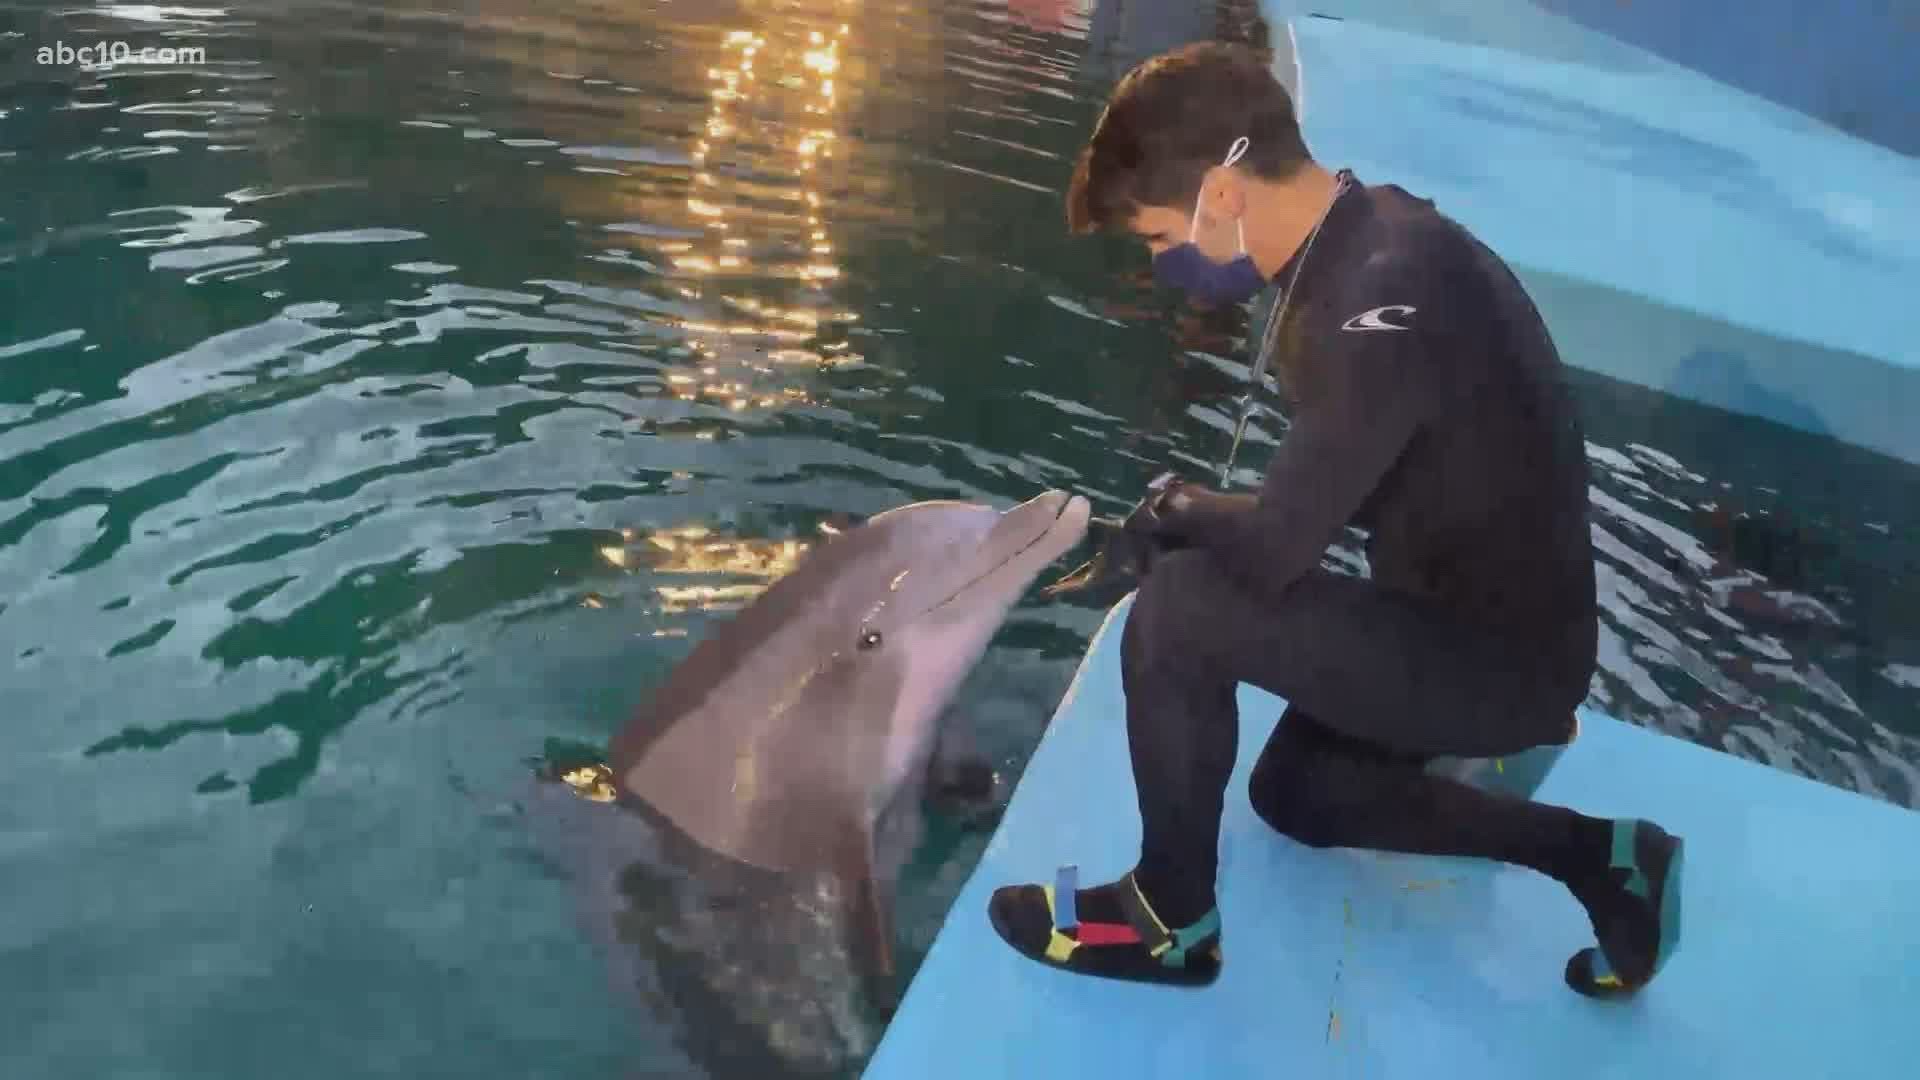 It's National Dolphin Day, and Mark S. Allen thought he would get a little love from Deek at Six Flags Discovery Kingdom.